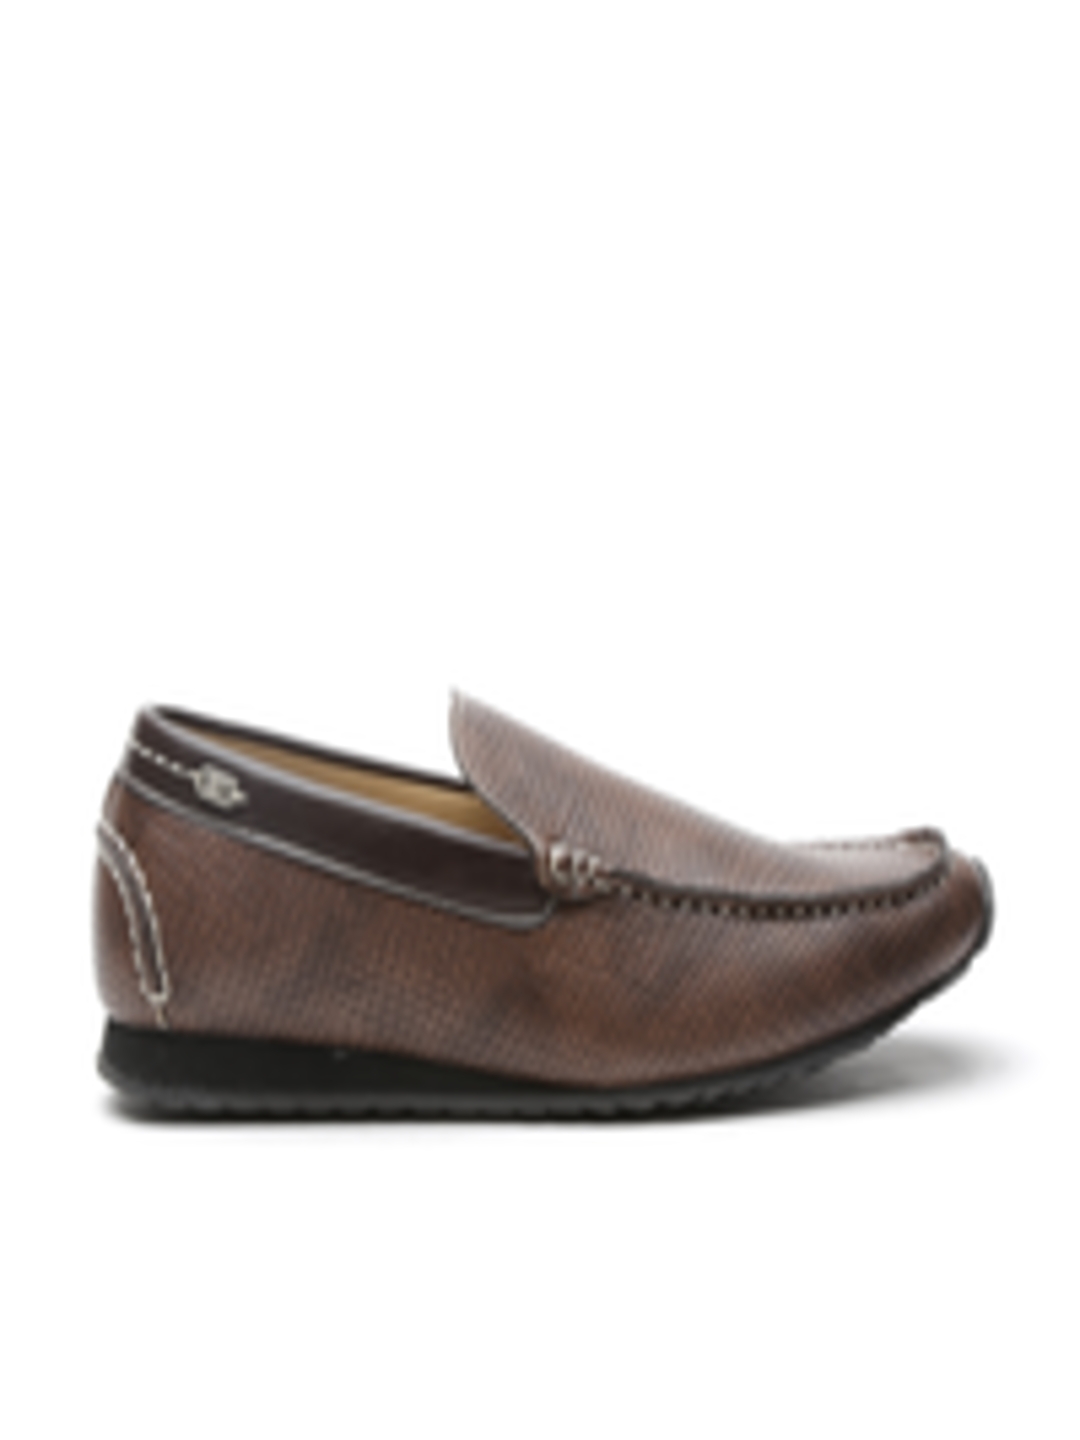 Buy Steve Madden Men Brown Textured Regular Loafers - Casual Shoes for ...